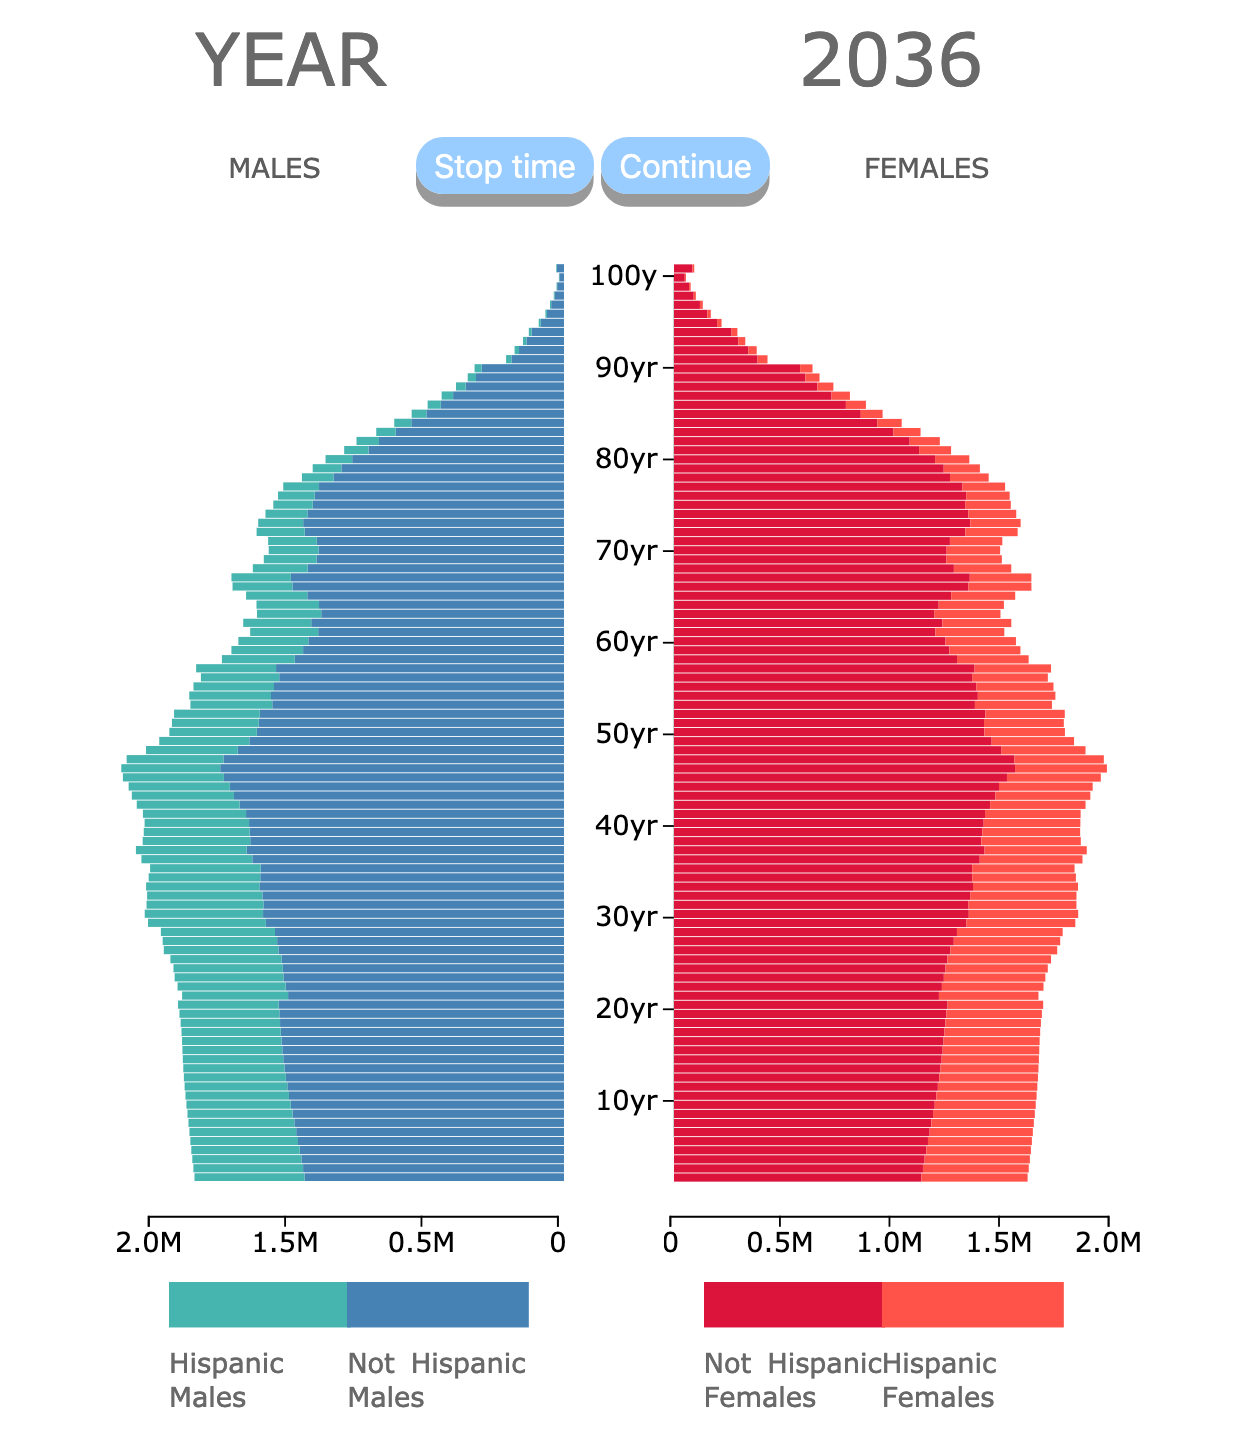 population pyramid by ethnicity in the USA